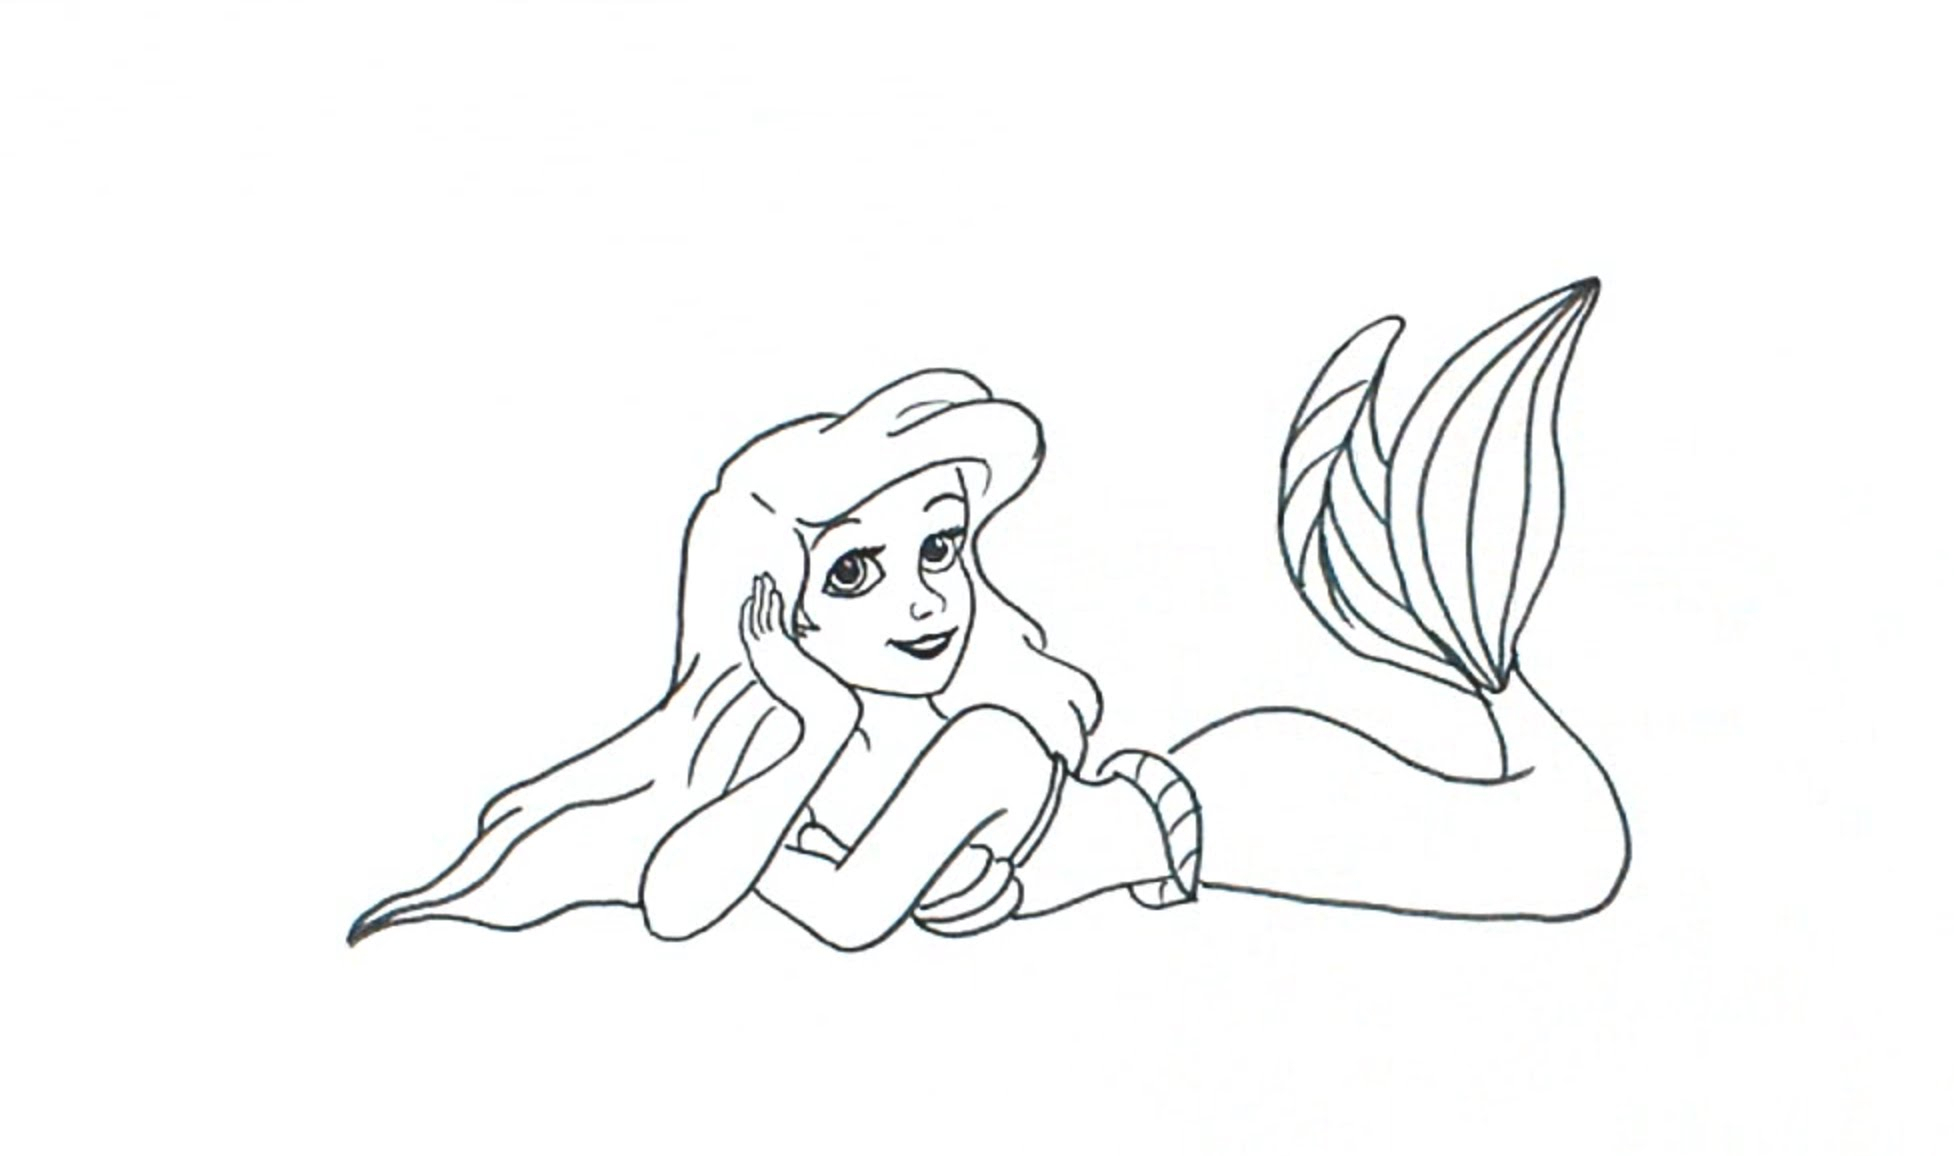 Amazing How To Draw The Little Mermaid in the world Check it out now 